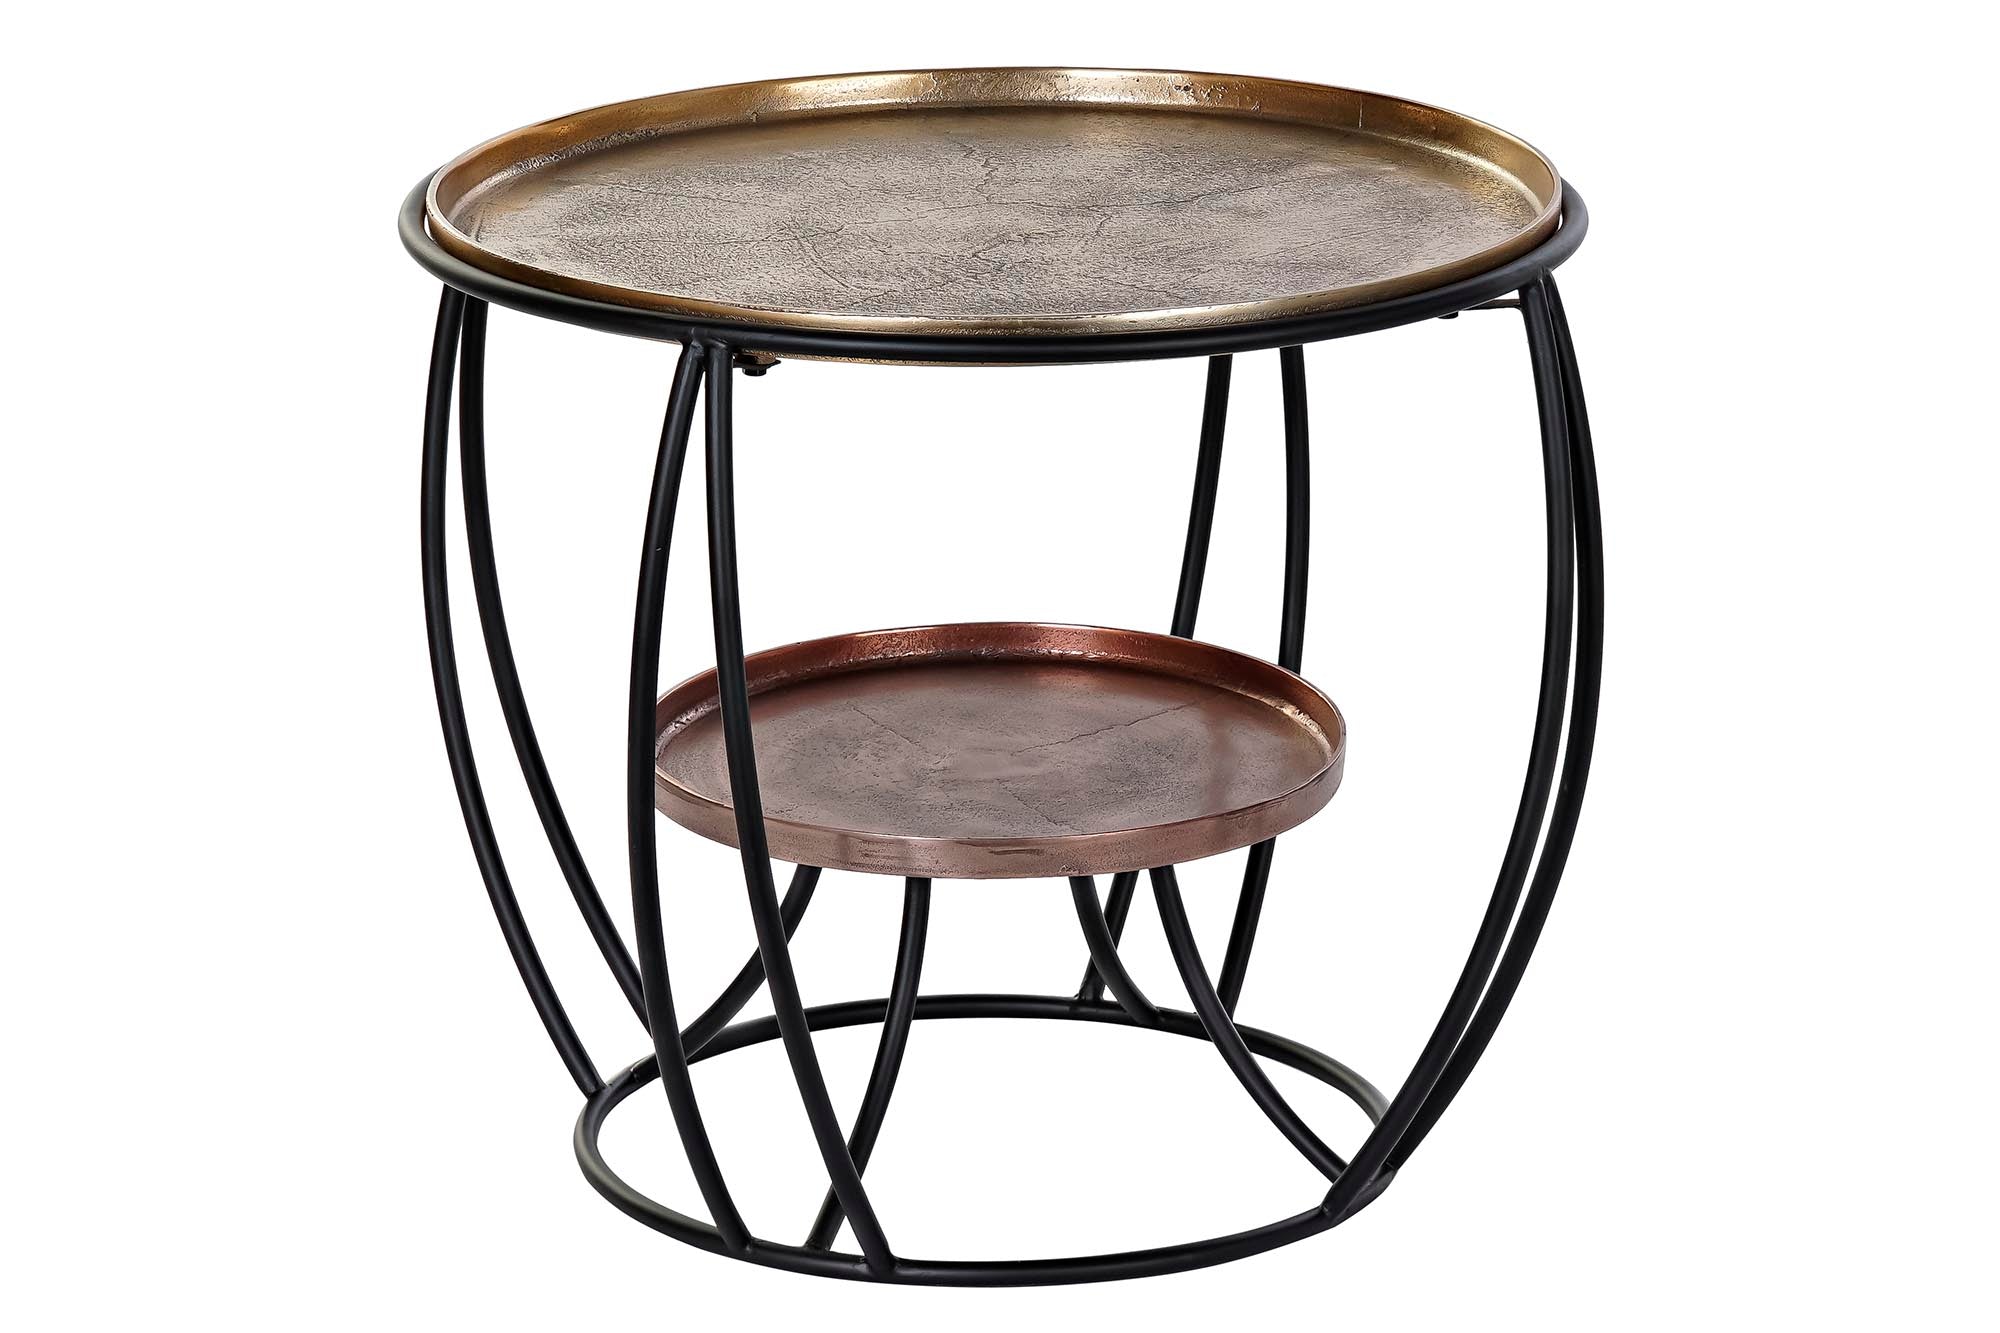 Round Coffee Table with wow factor!